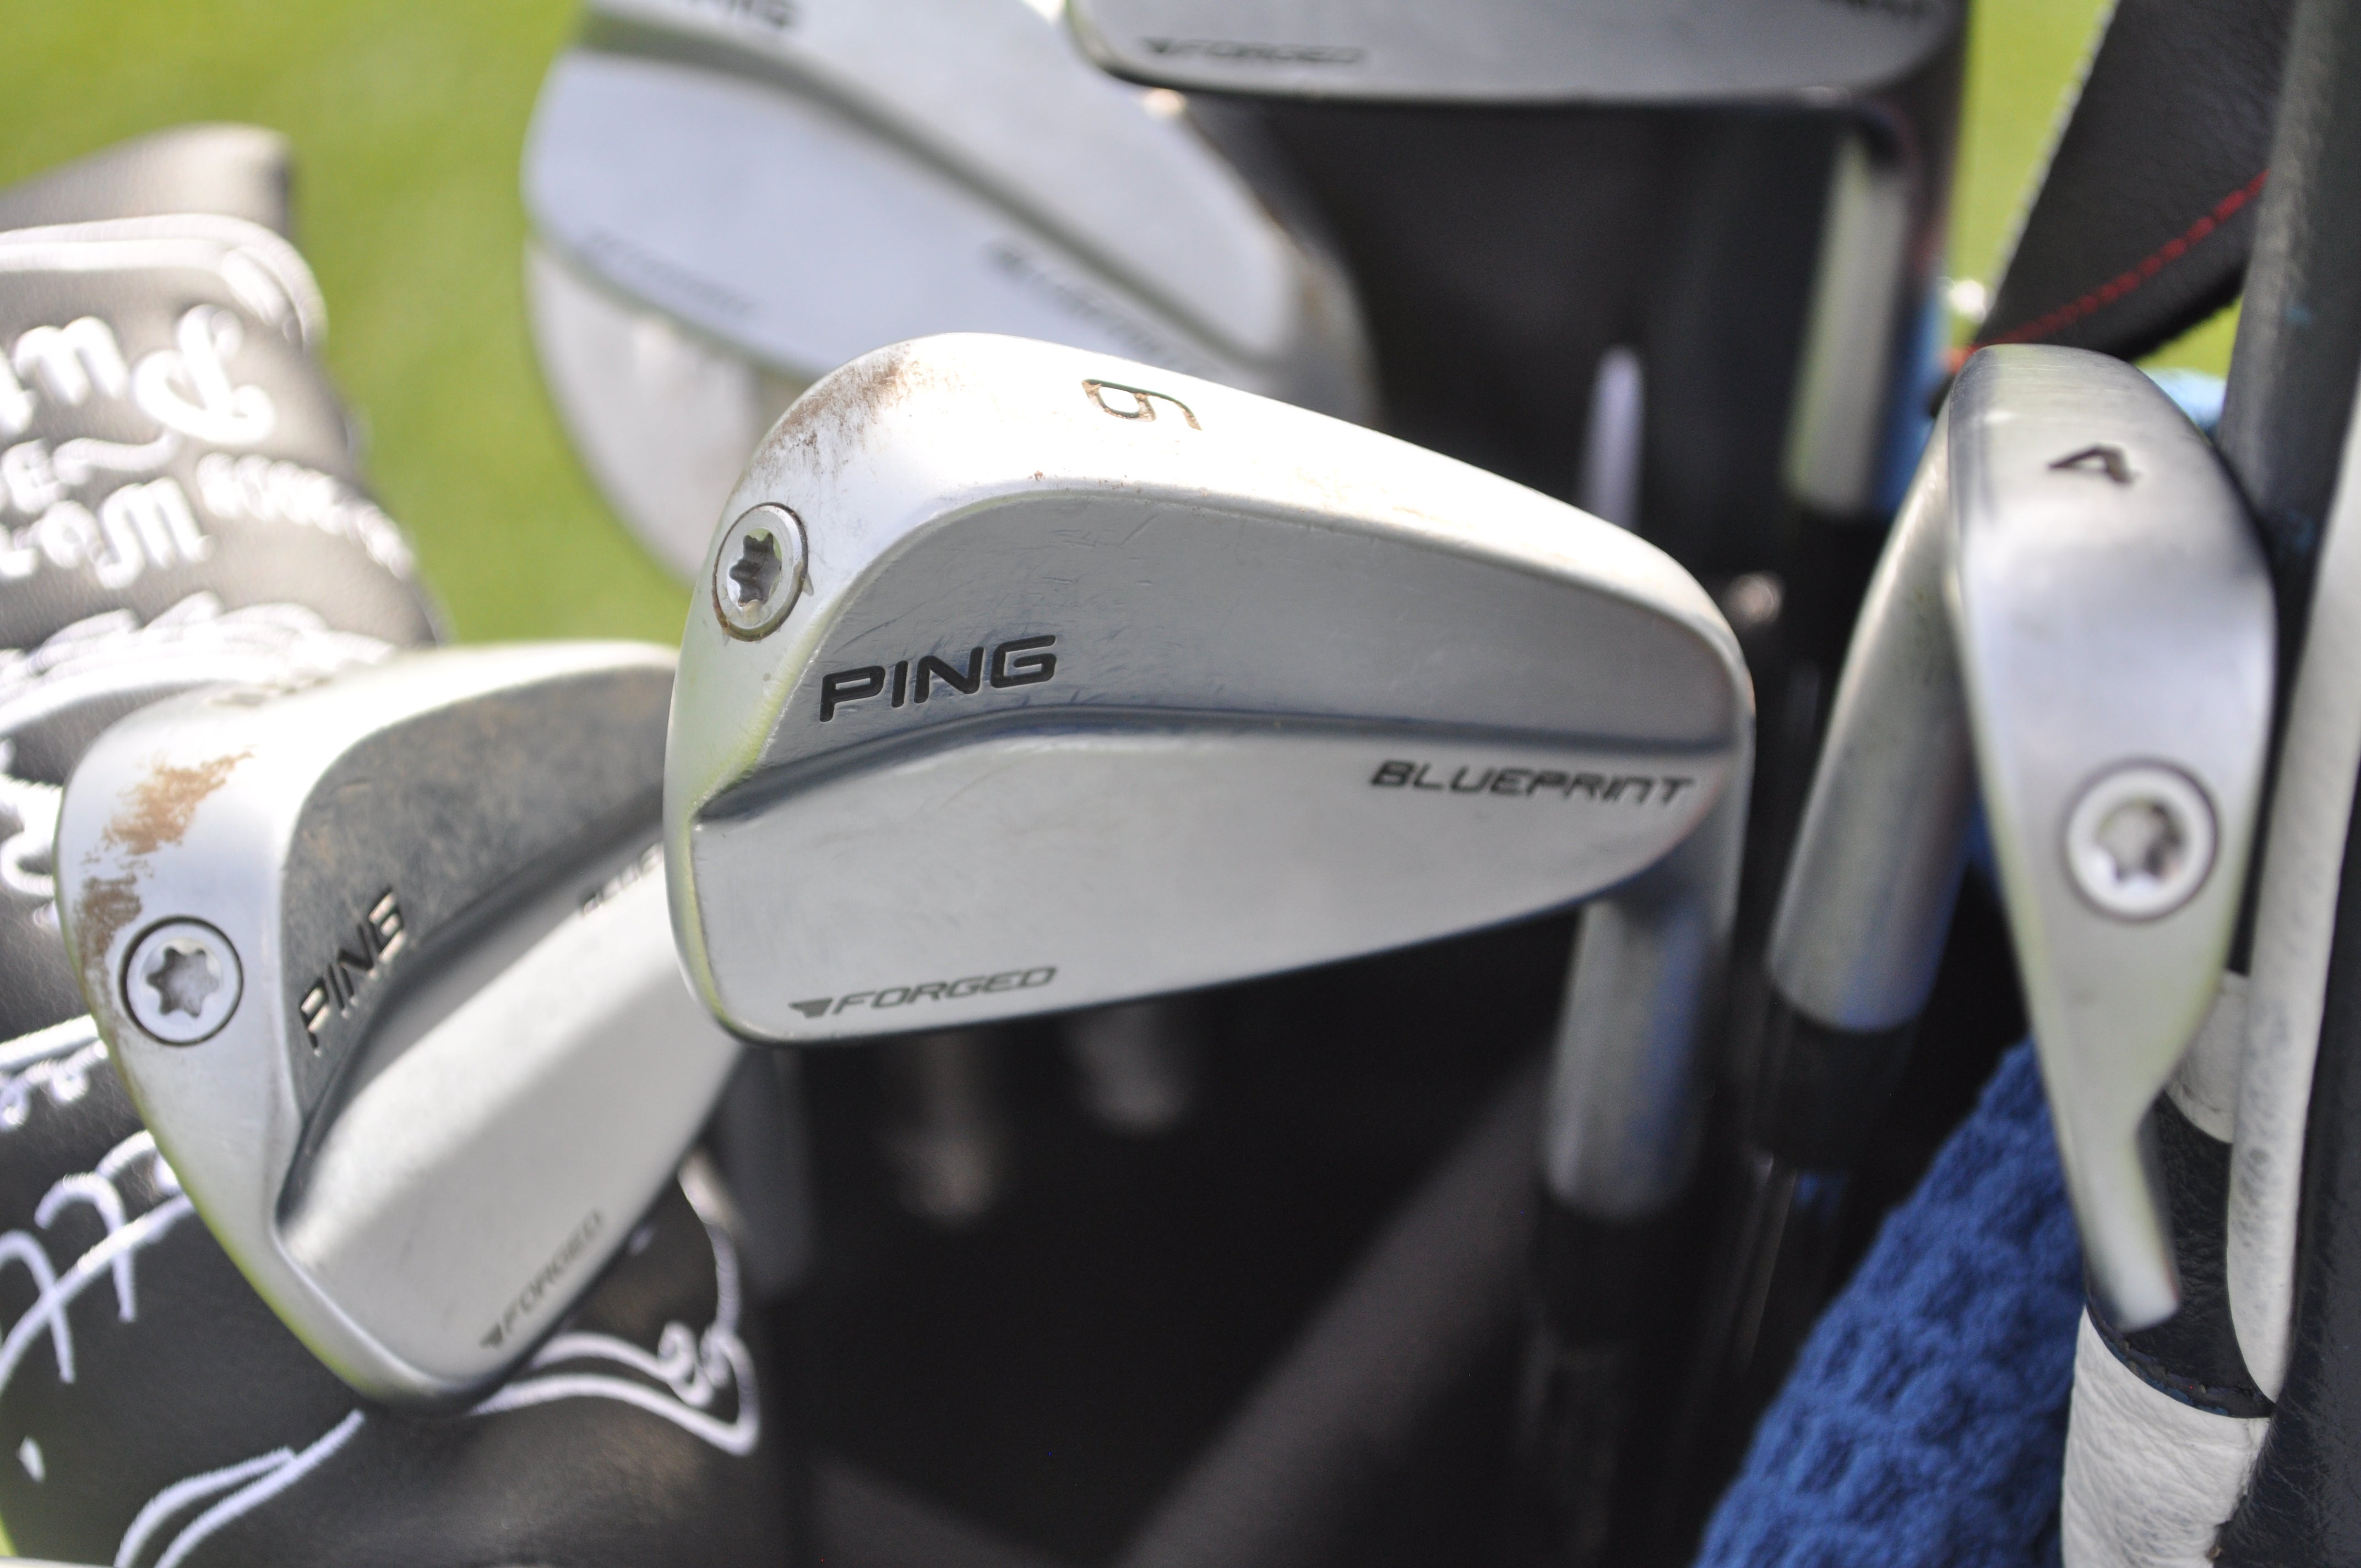 Tony Finau's Ping Blueprint irons have a solid layer of dirt from a recent range session. 